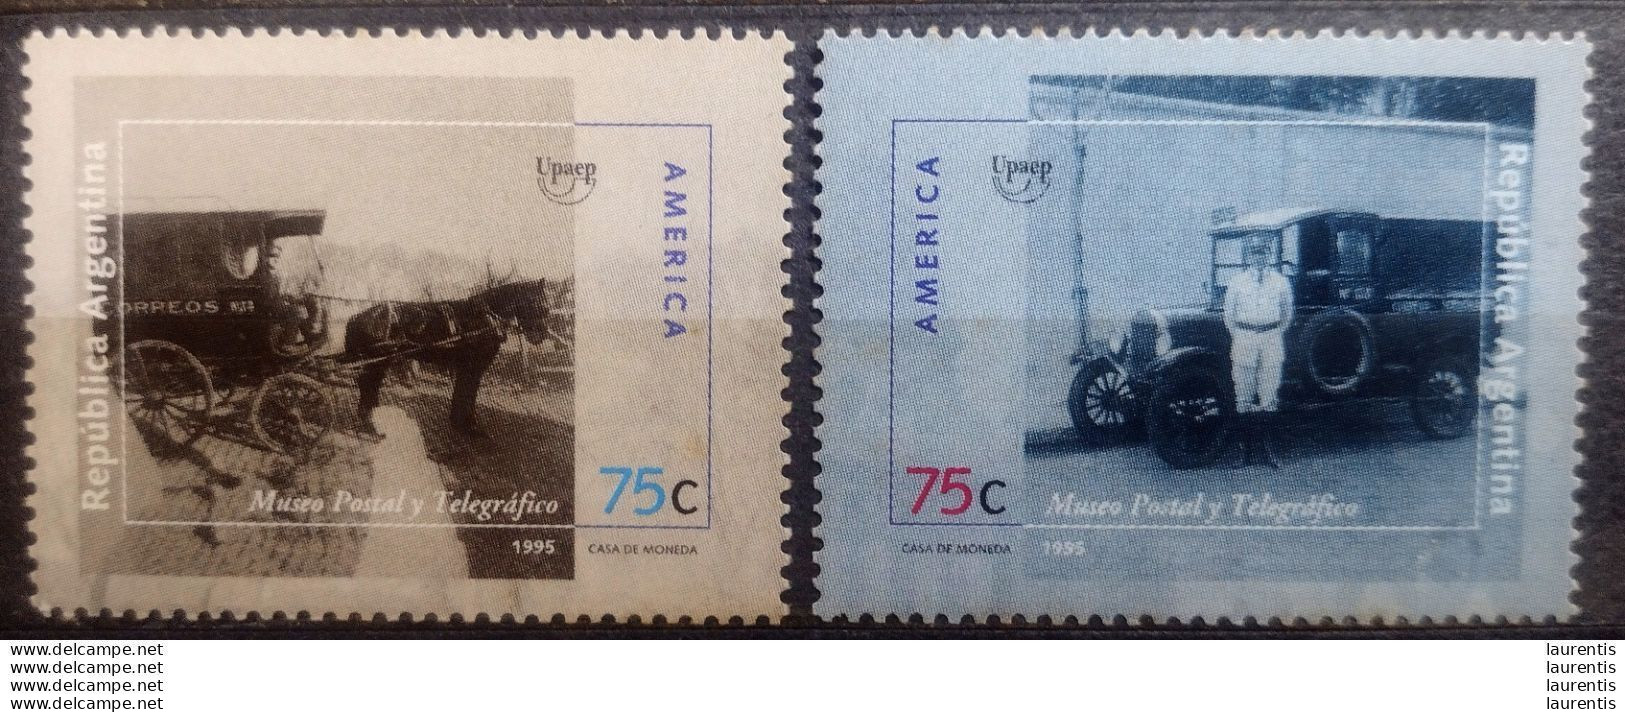 D7467. Trucks - Coaches - Post - Argentina Yv 1891-92 MNH - 1,50 (6) (1) - Camiones